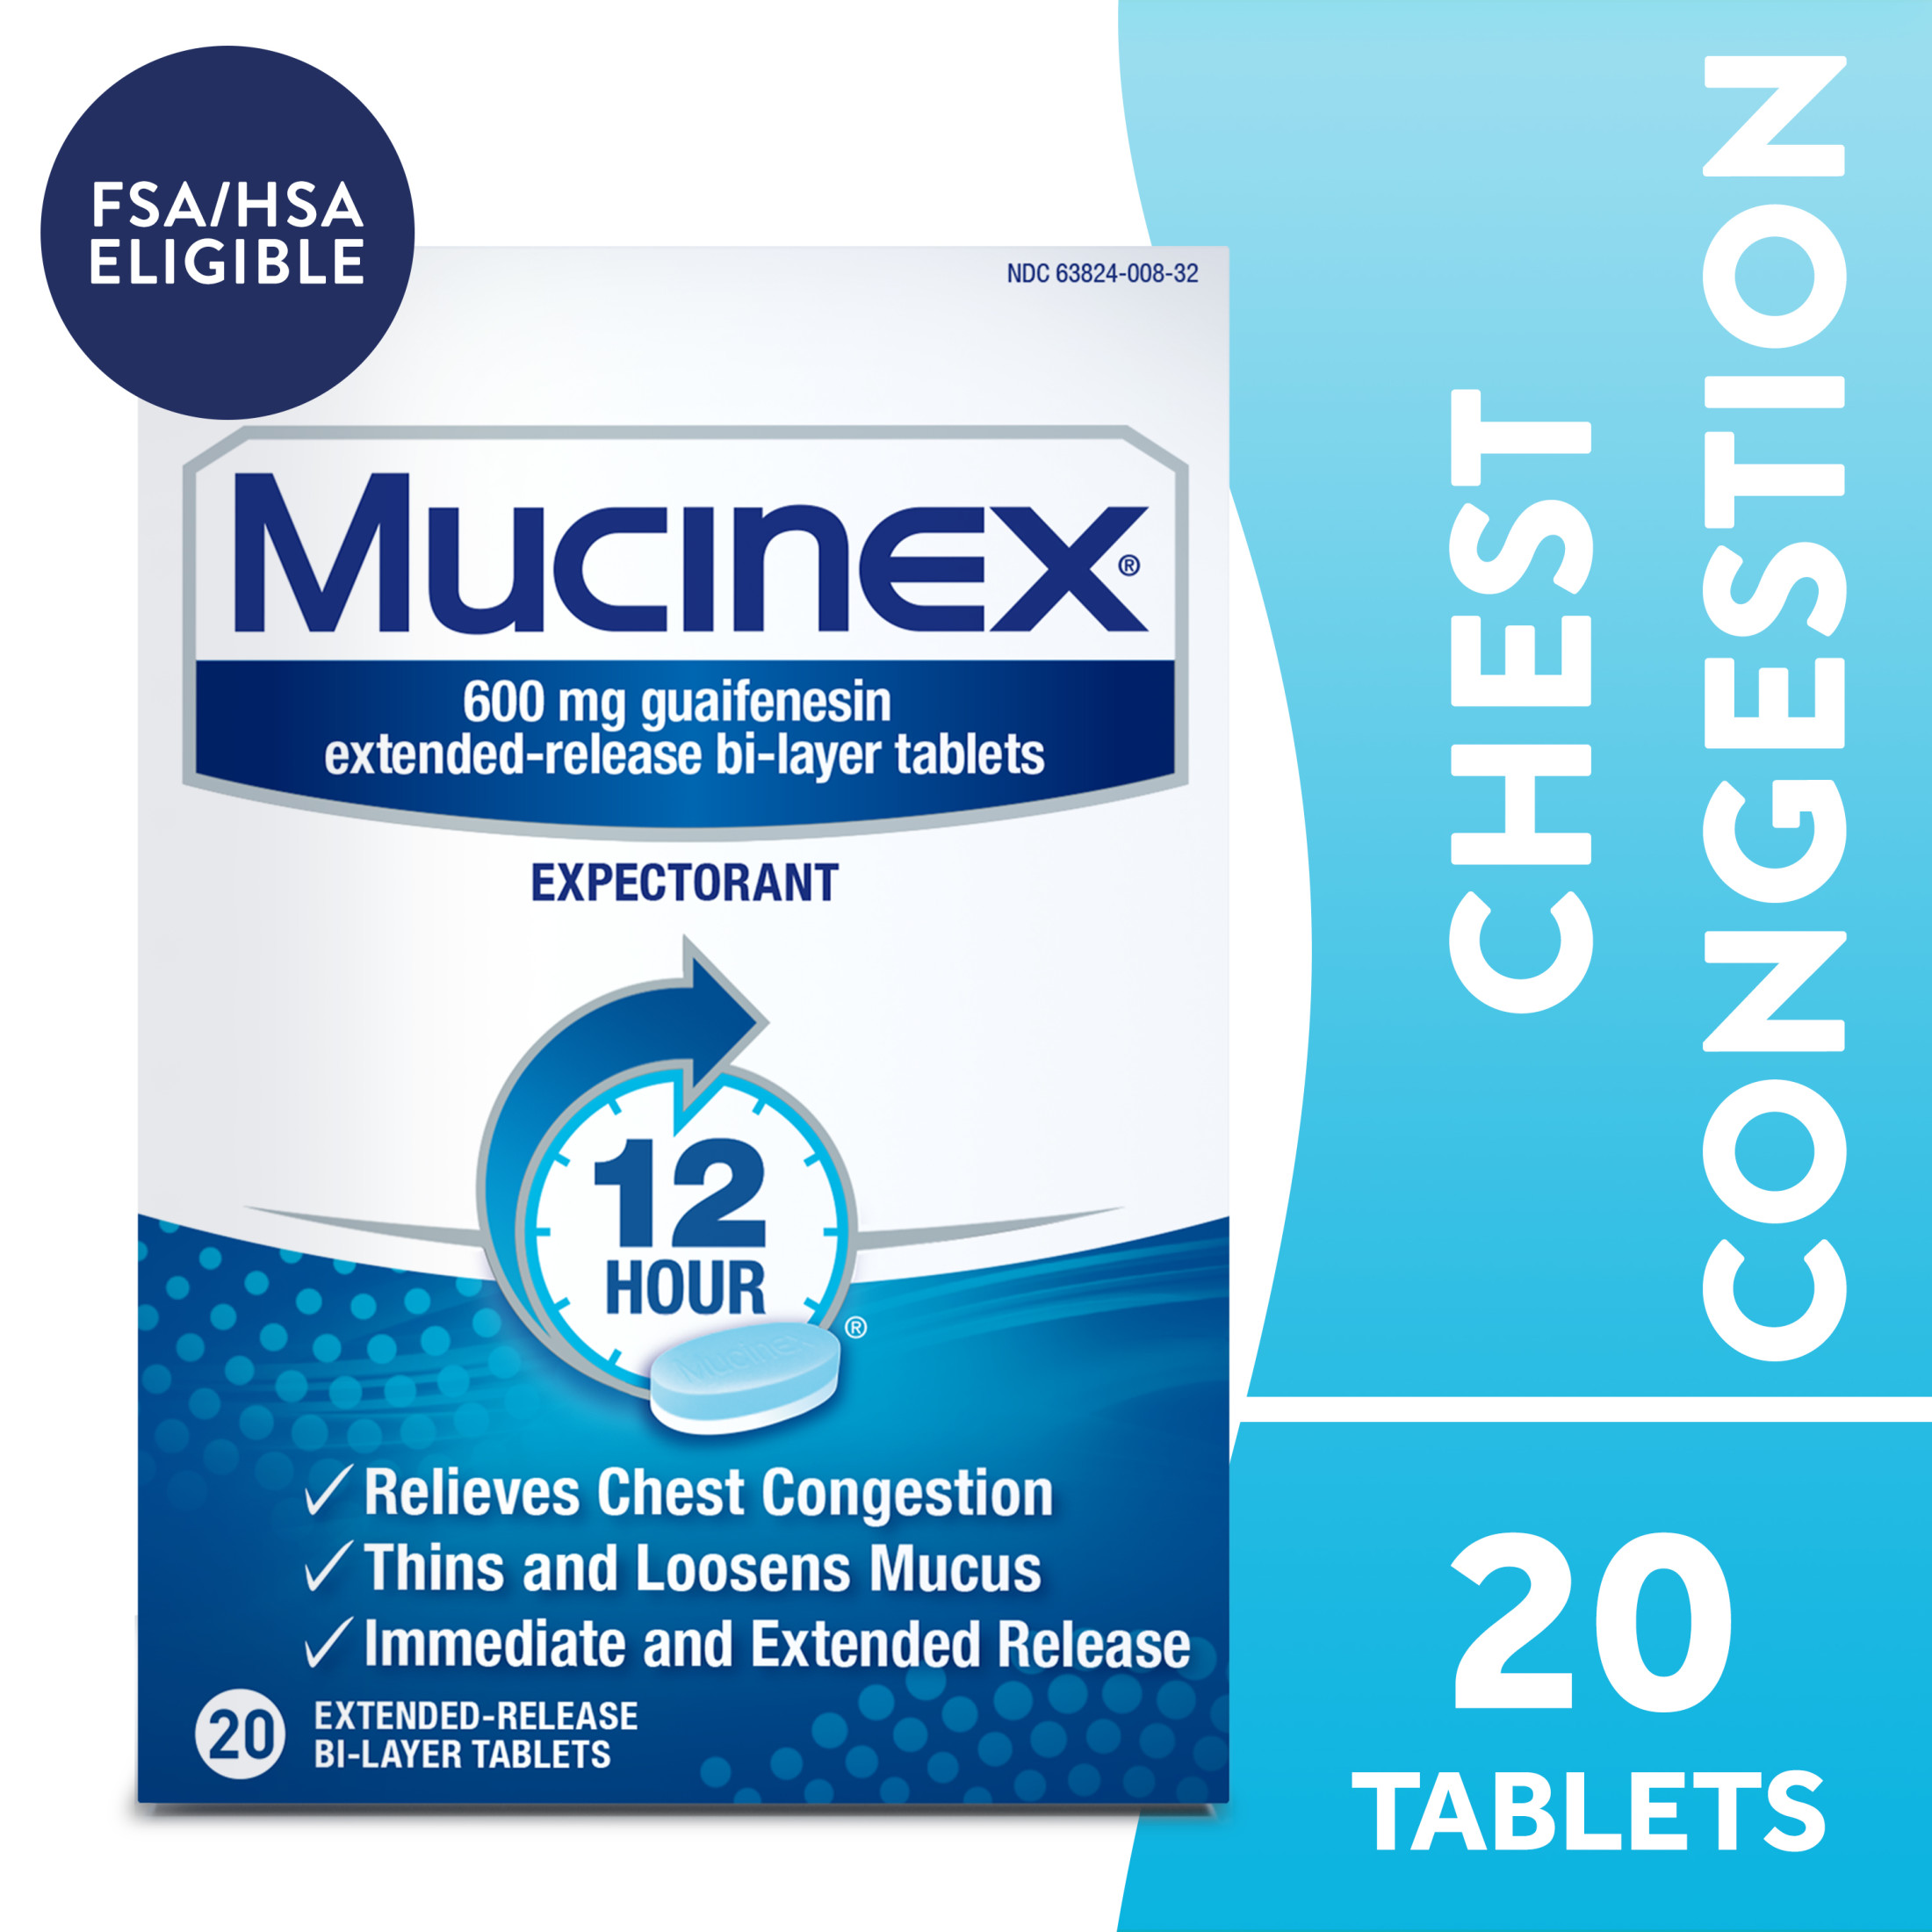 Mucinex 12 Hour Relief, Chest Congestion and Cough Medicine, 20 Tablets - image 1 of 13